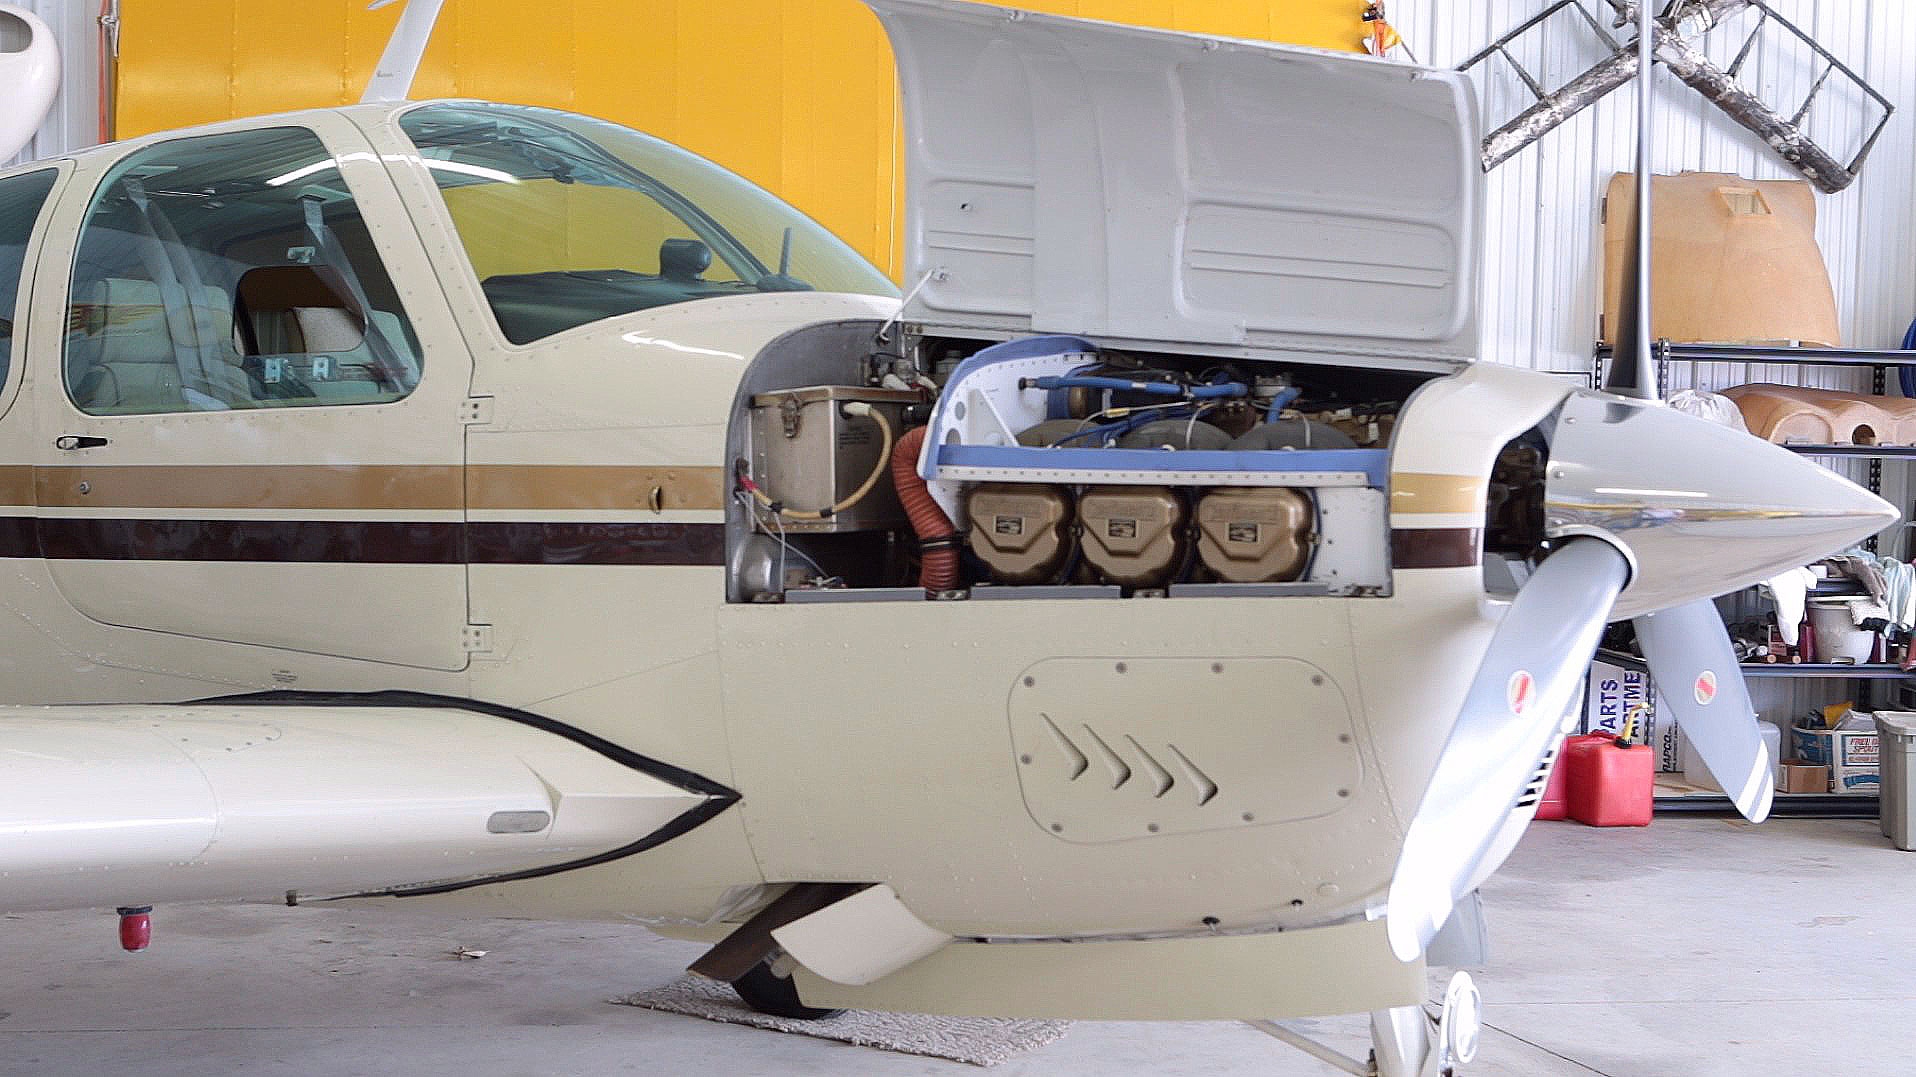 Proper care and maintenance of aircraft exhaust systems is essential.